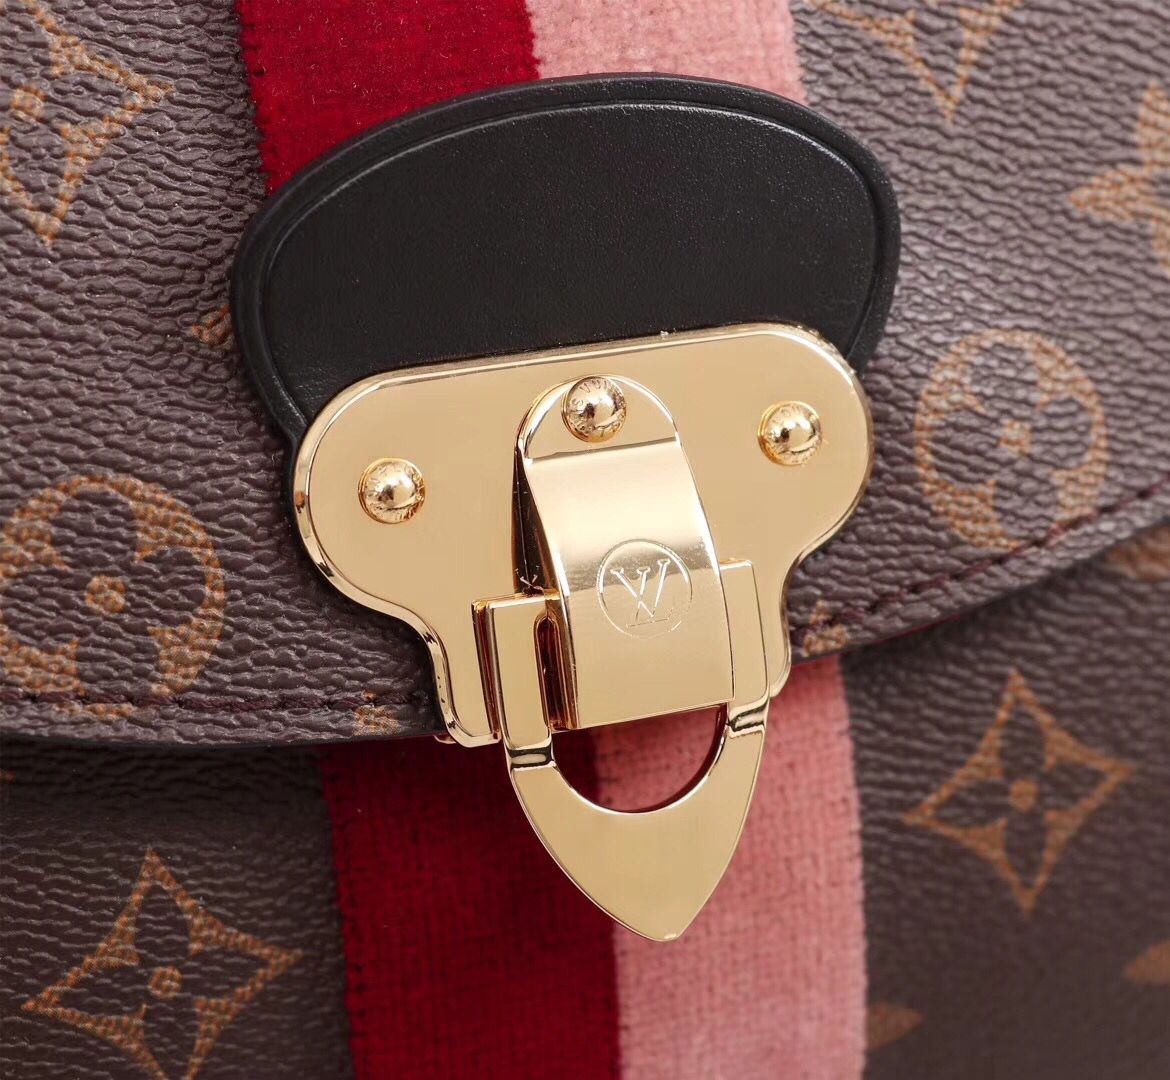 Louis Vuitton GEORGES BB M43866 pink&red